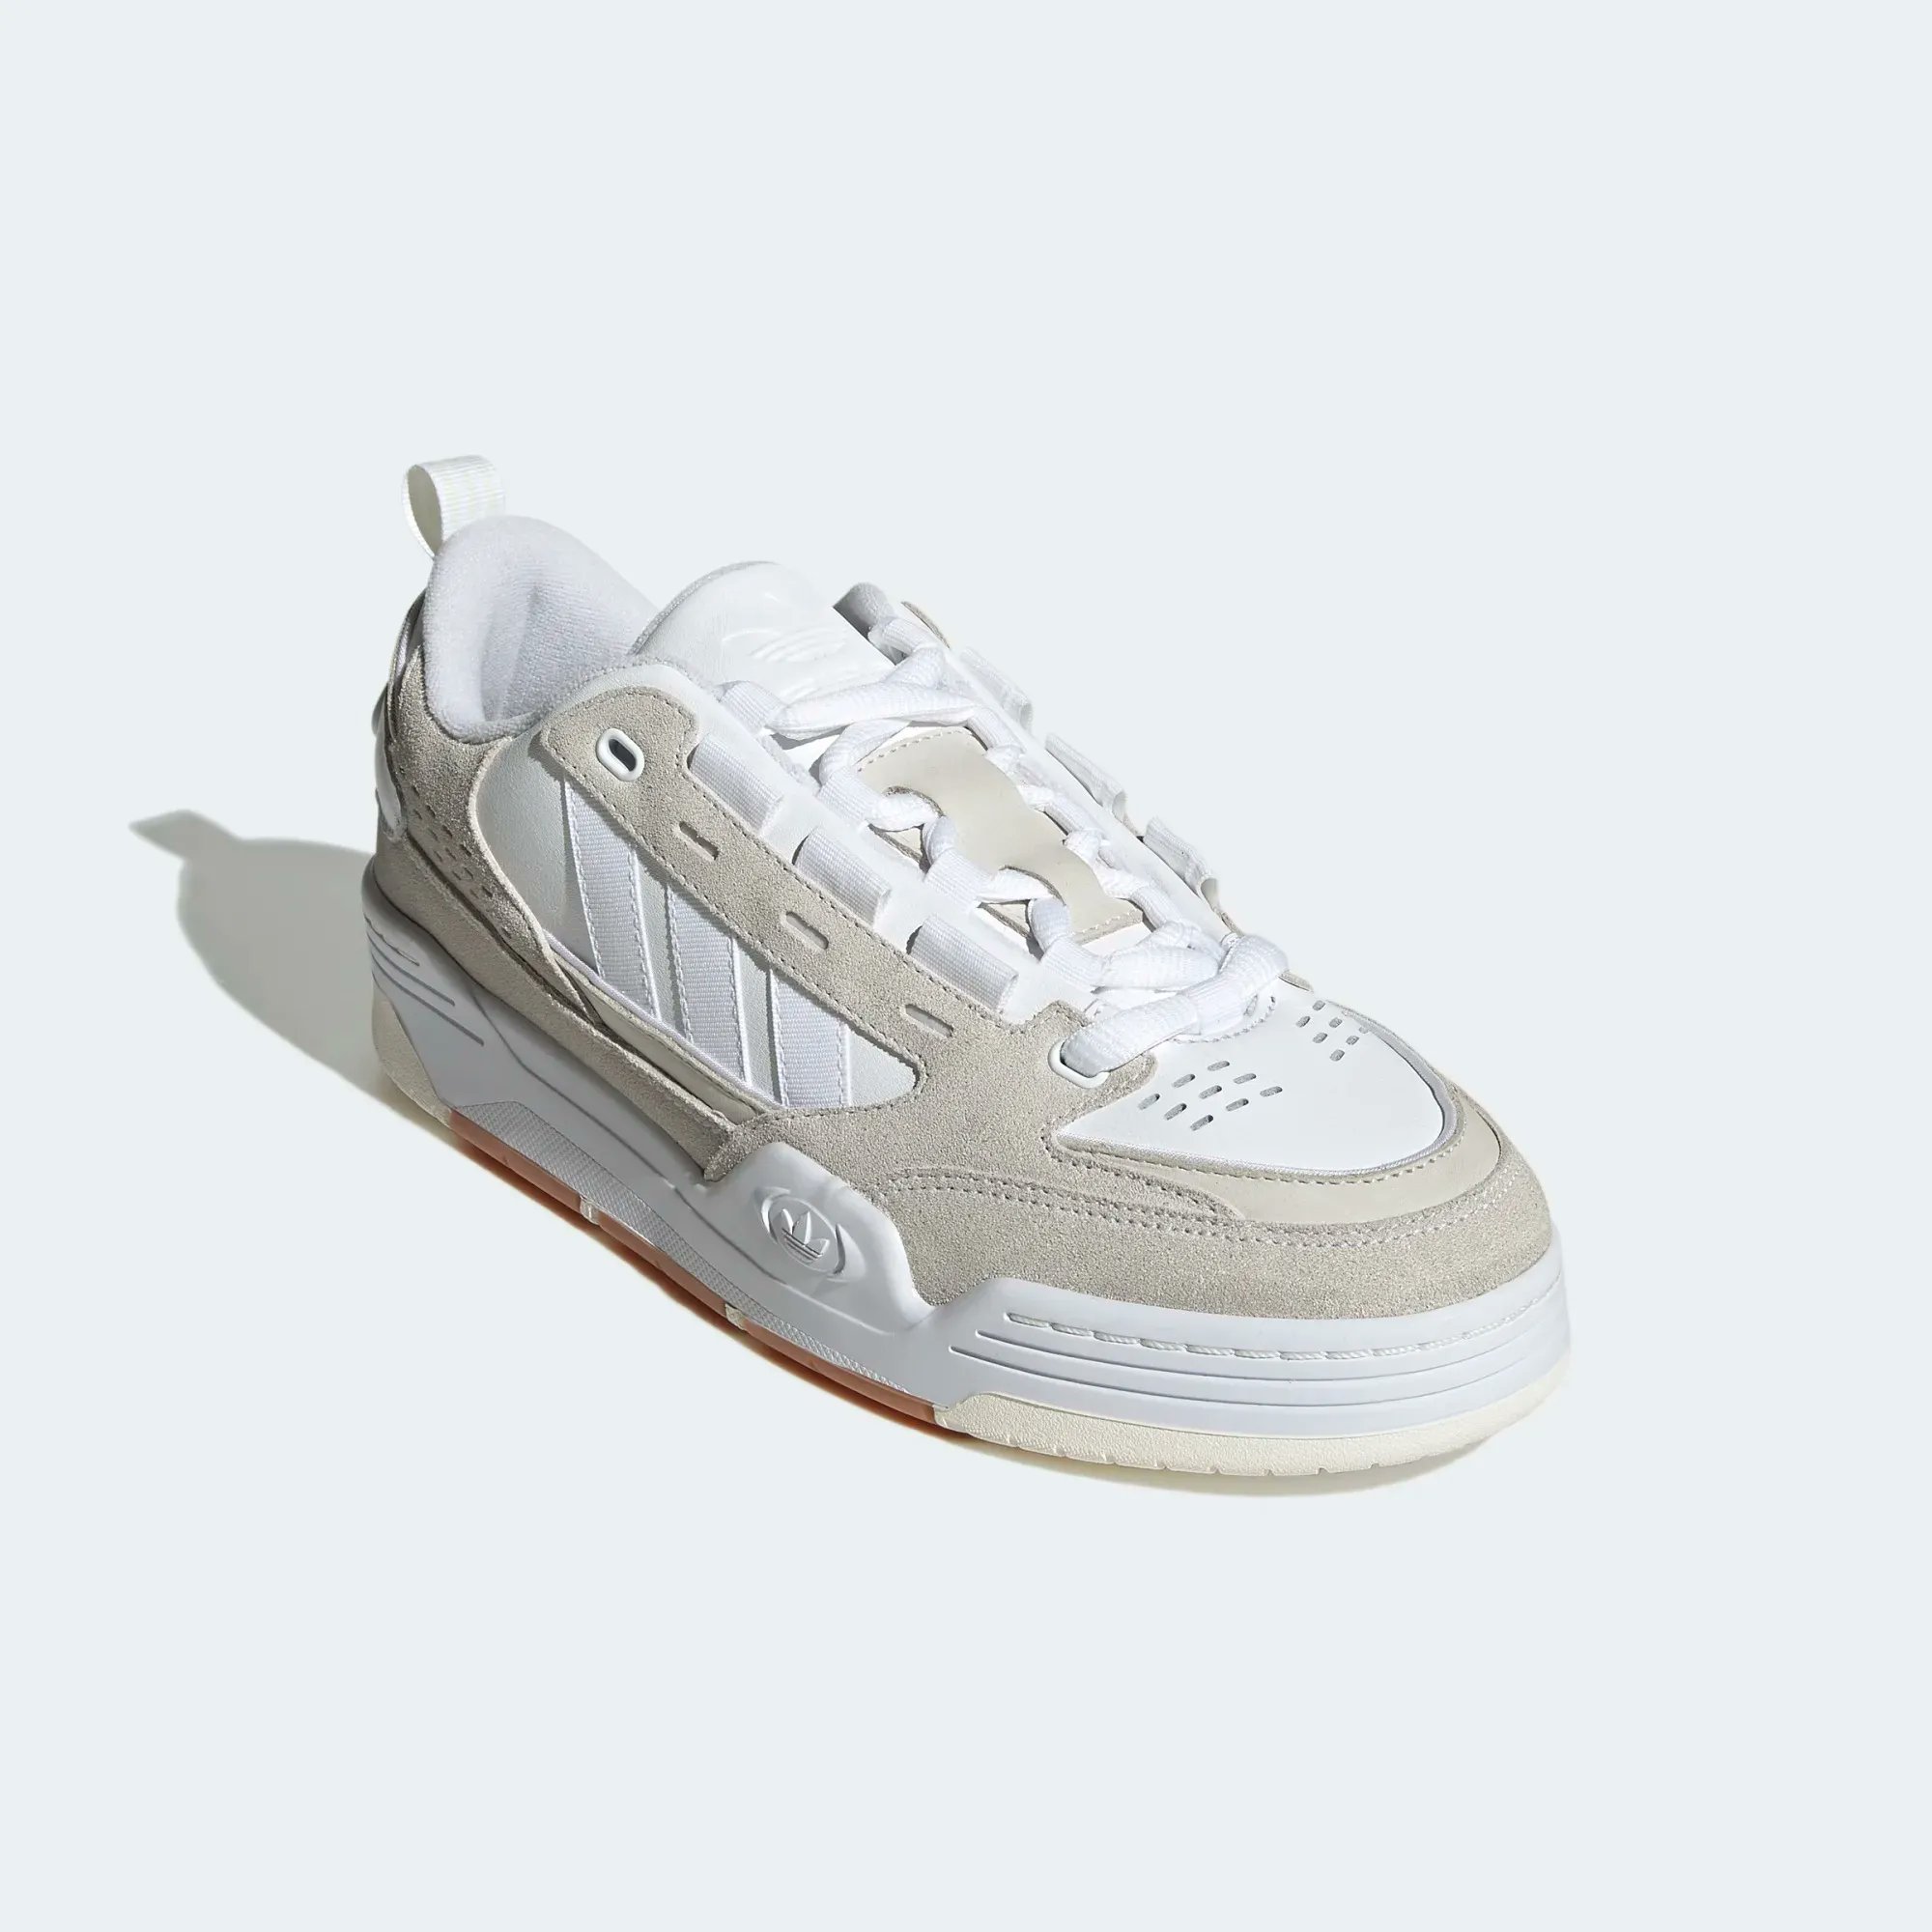 KicksFinder on Twitter: "Ad: Clean, authentic looks. Available via adidas US Adi2000 "Cloud White/Off White" $100 + FREE shipping and returns &gt;&gt; https://t.co/YpvddcKDQW" /